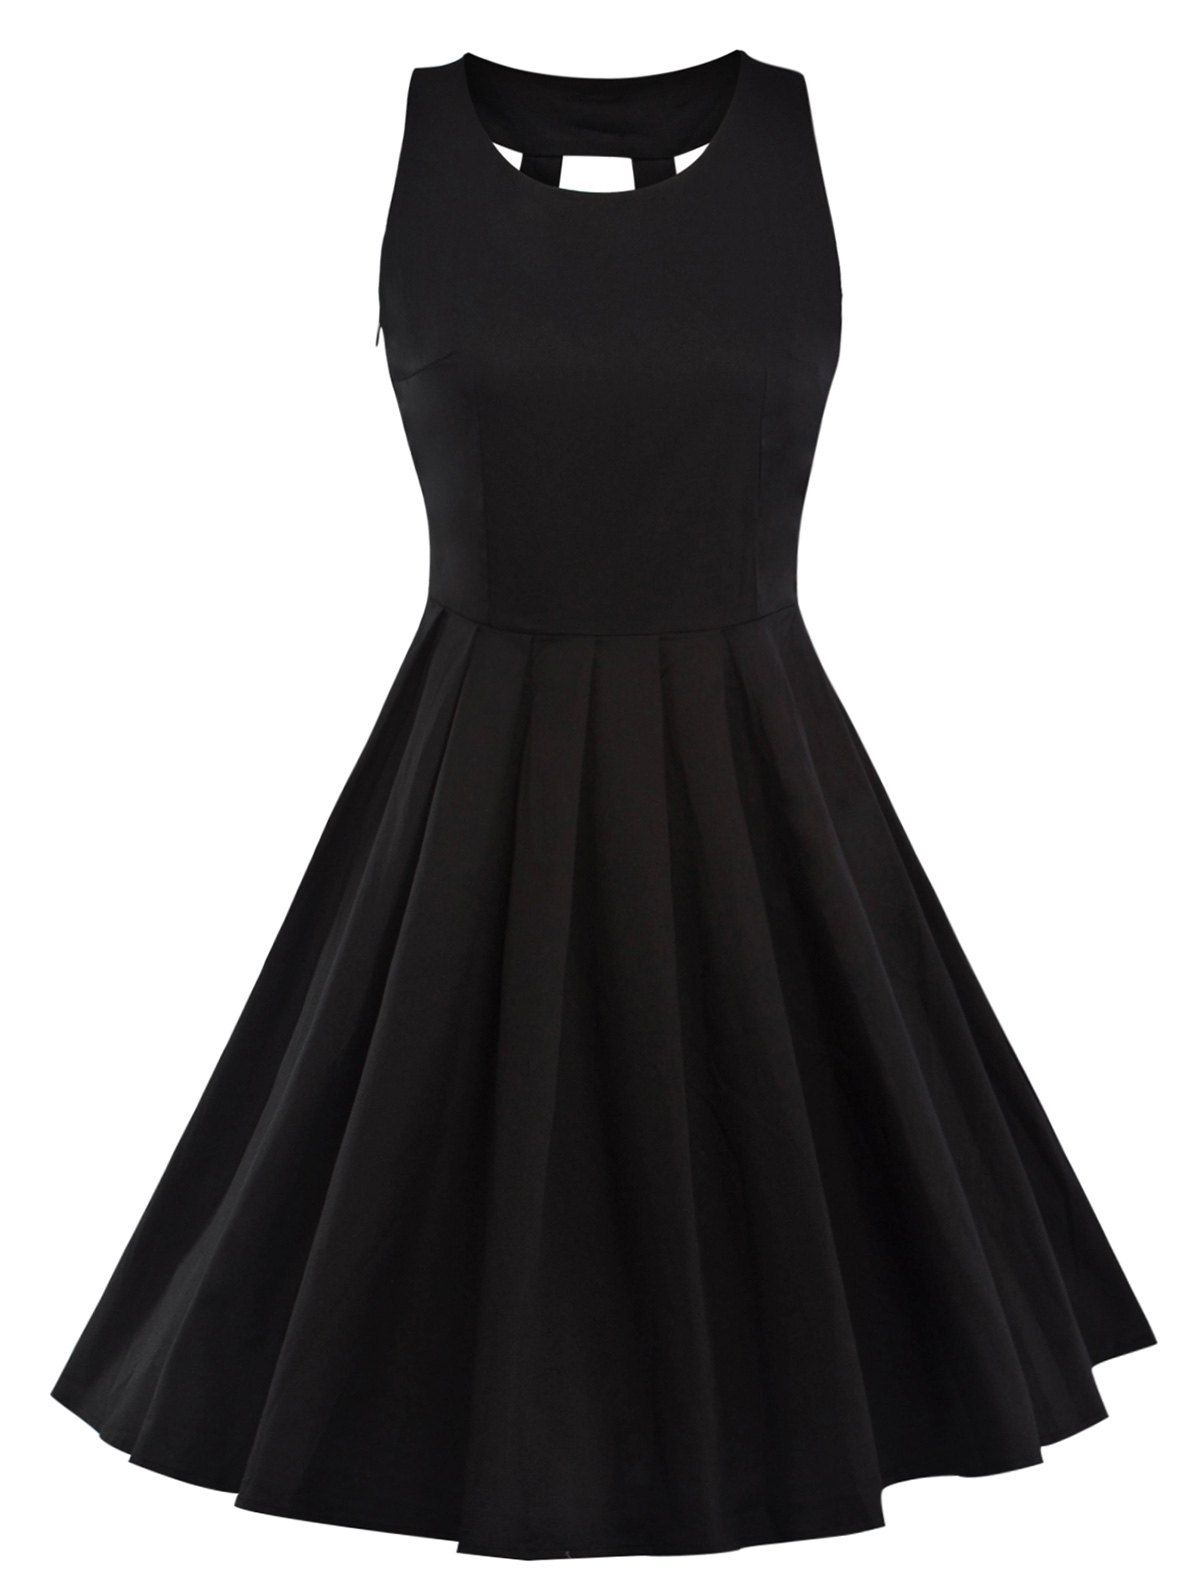 [9% OFF] Vintage Pleated Fit And Flare Dress | Rosegal